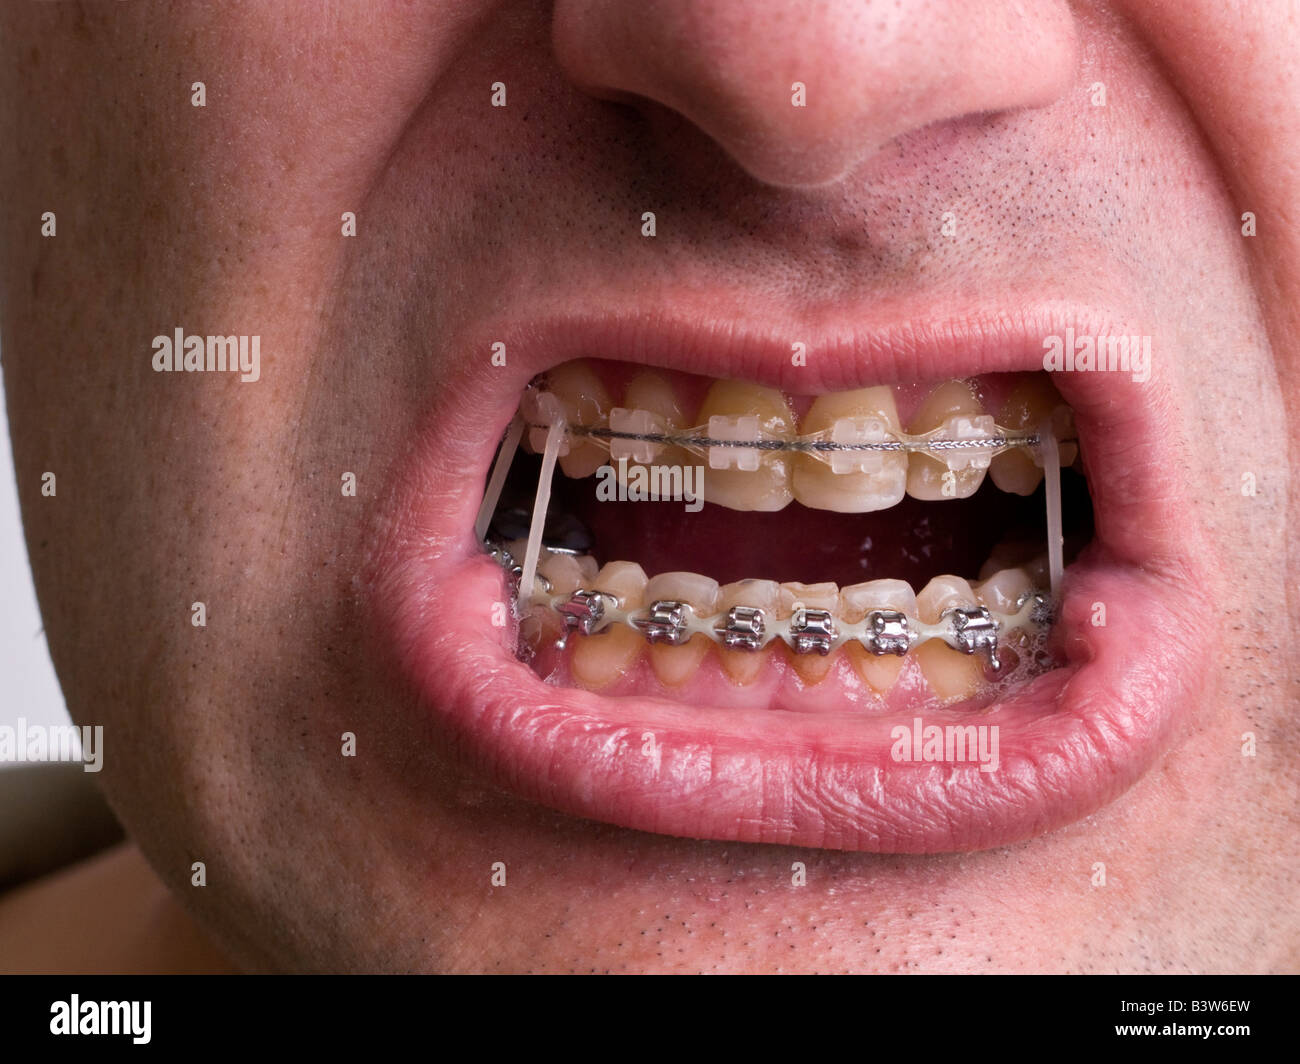 Adult male with mouth open showing braces Stock Photo